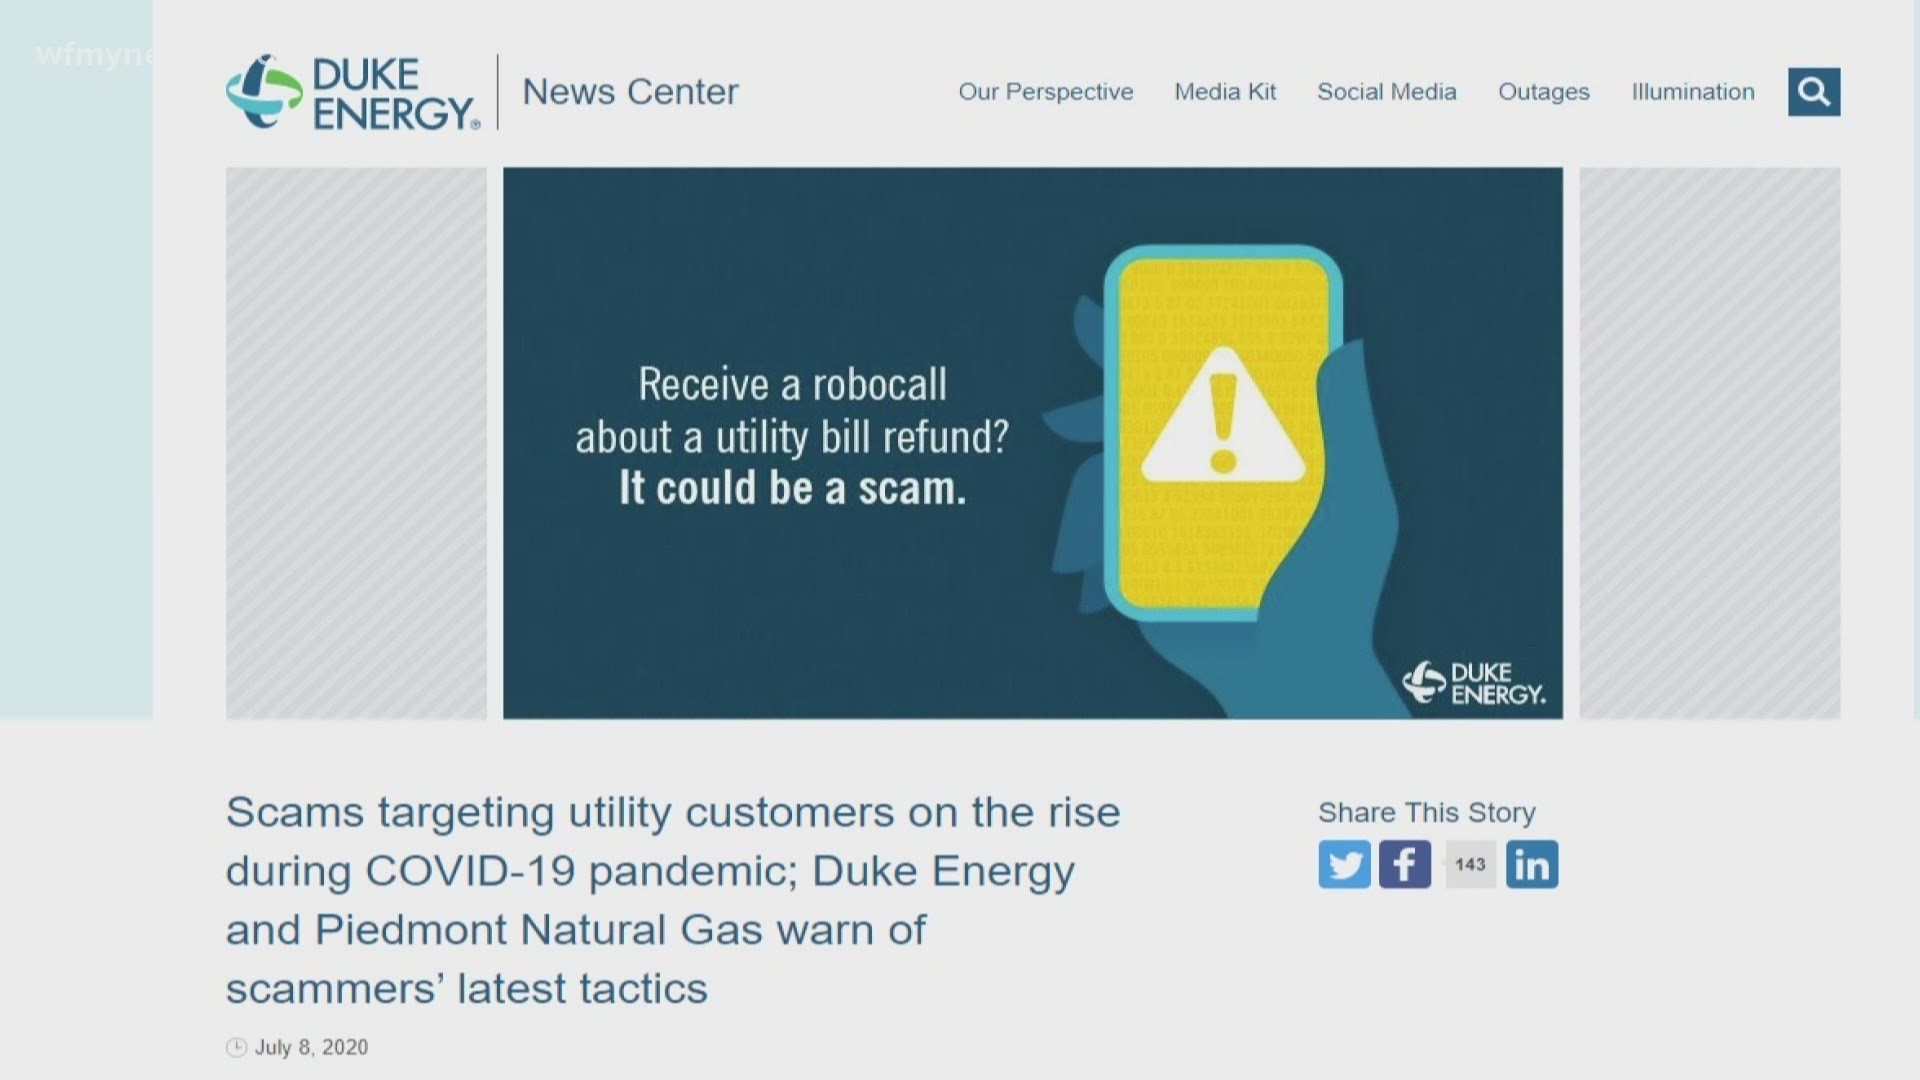 If you had any kind of real overpayment, Duke Energy will apply refunds as a credit to your customer account.